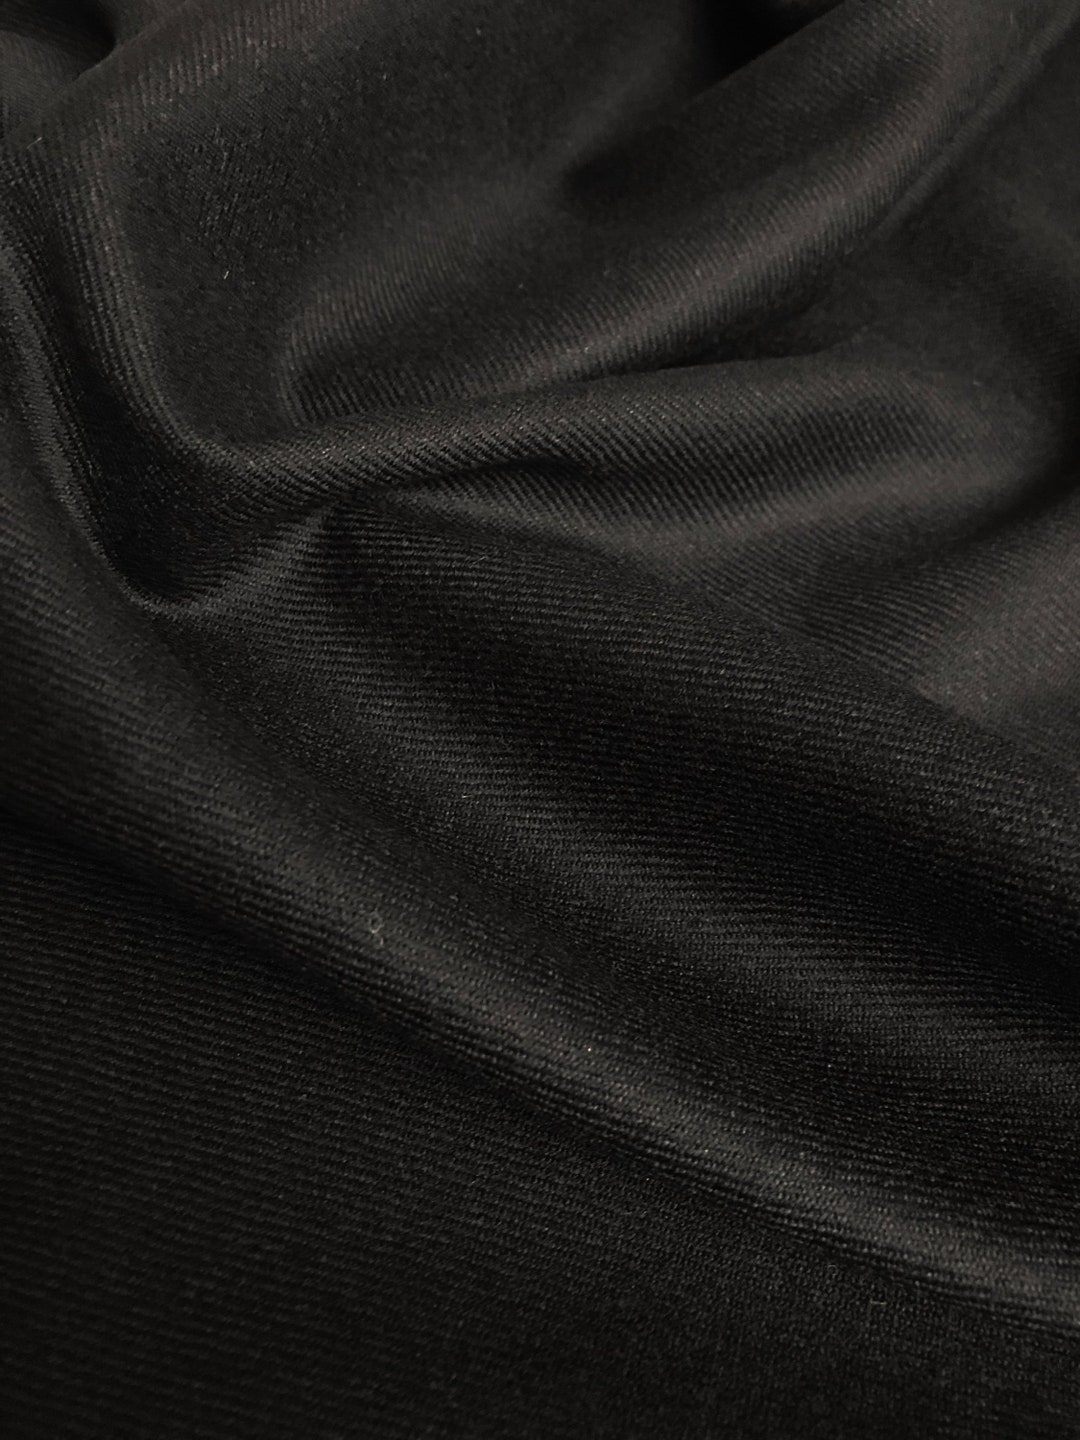 Black Tudor Style Worsted Wool Cloth Fabric Sold by the Half - Etsy